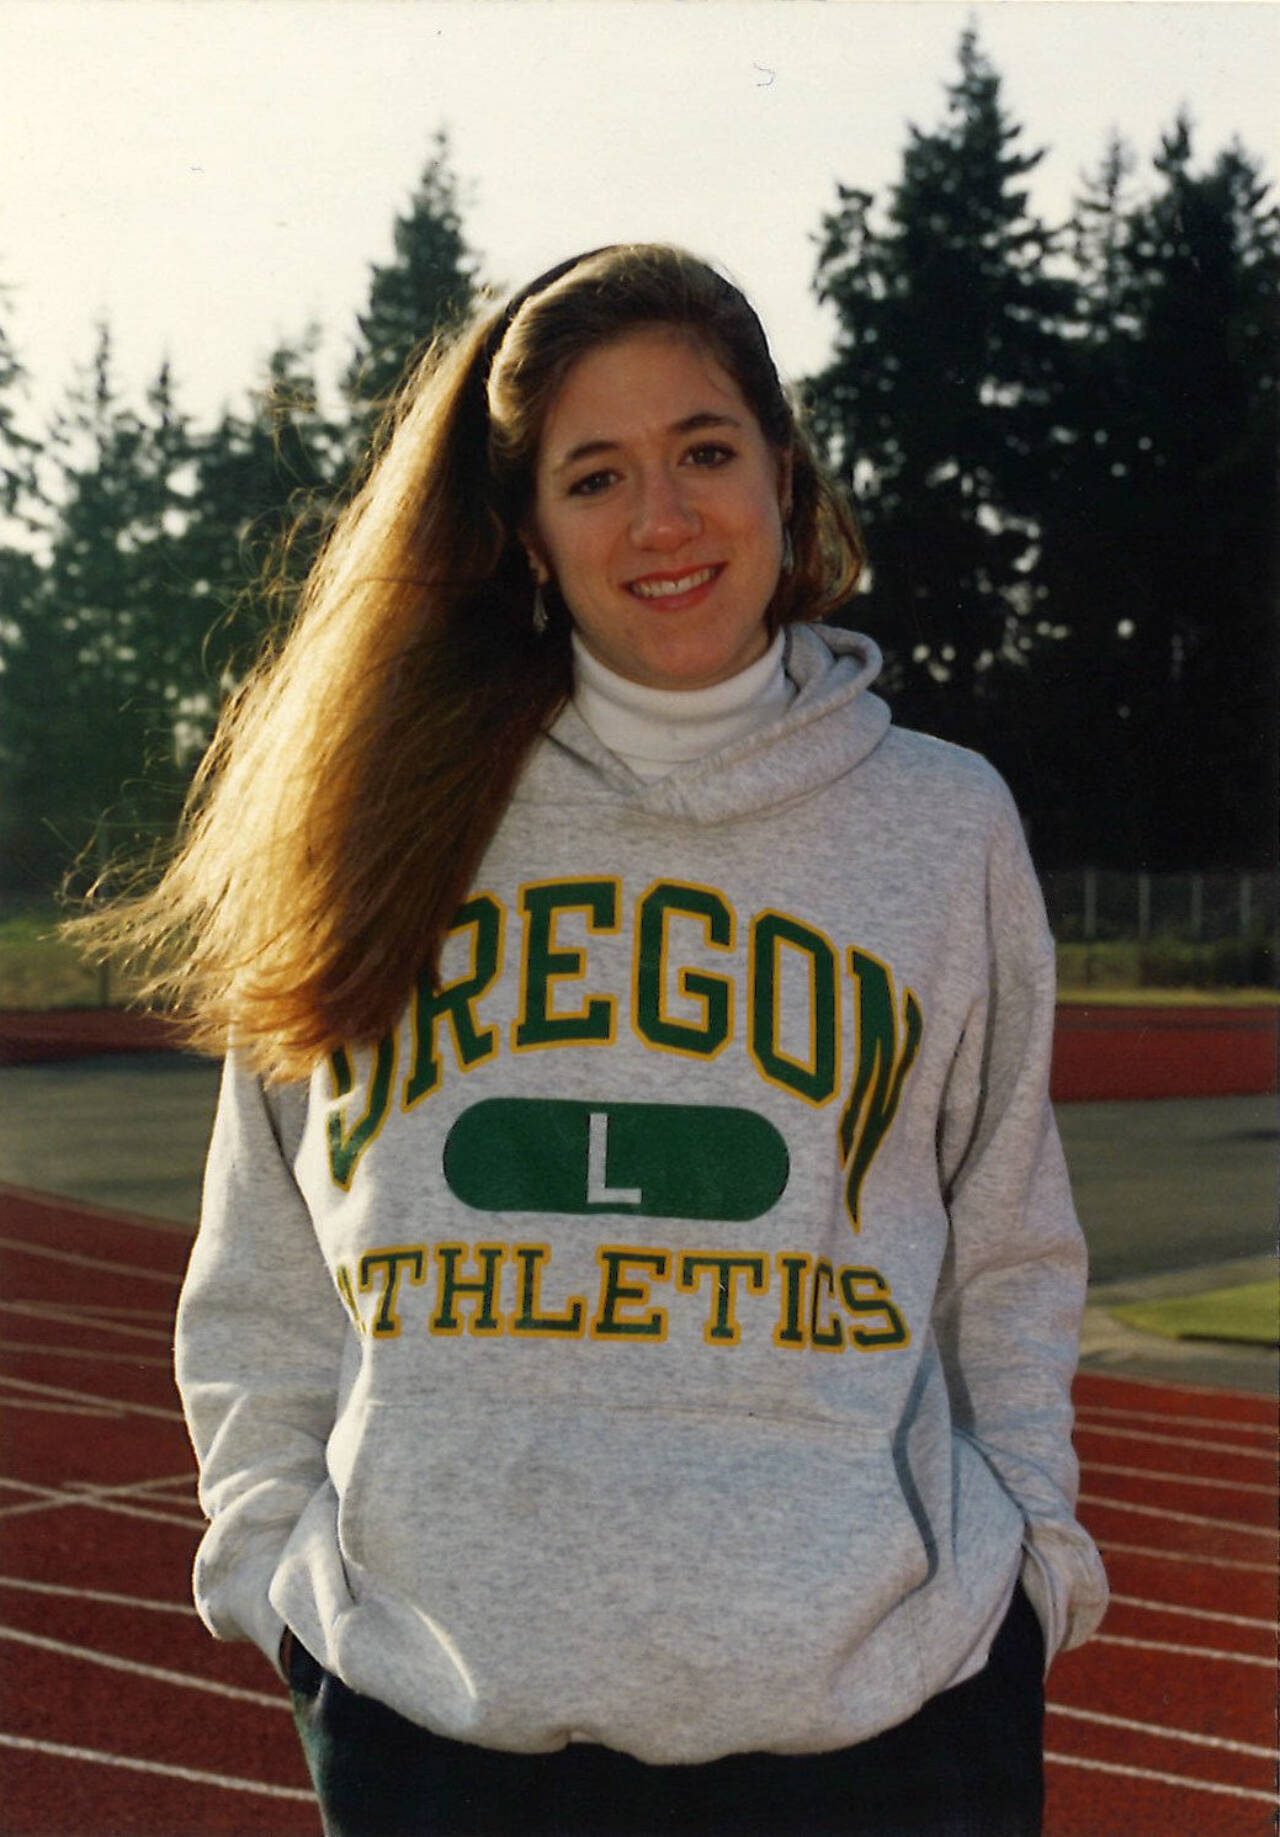 Edmonds graduate Erika Klein excelled in cross country and track and field at Oregon and was The Herald’s 1993 Woman of the Year in Sports. (Snohomish County Hall of Fame photo)